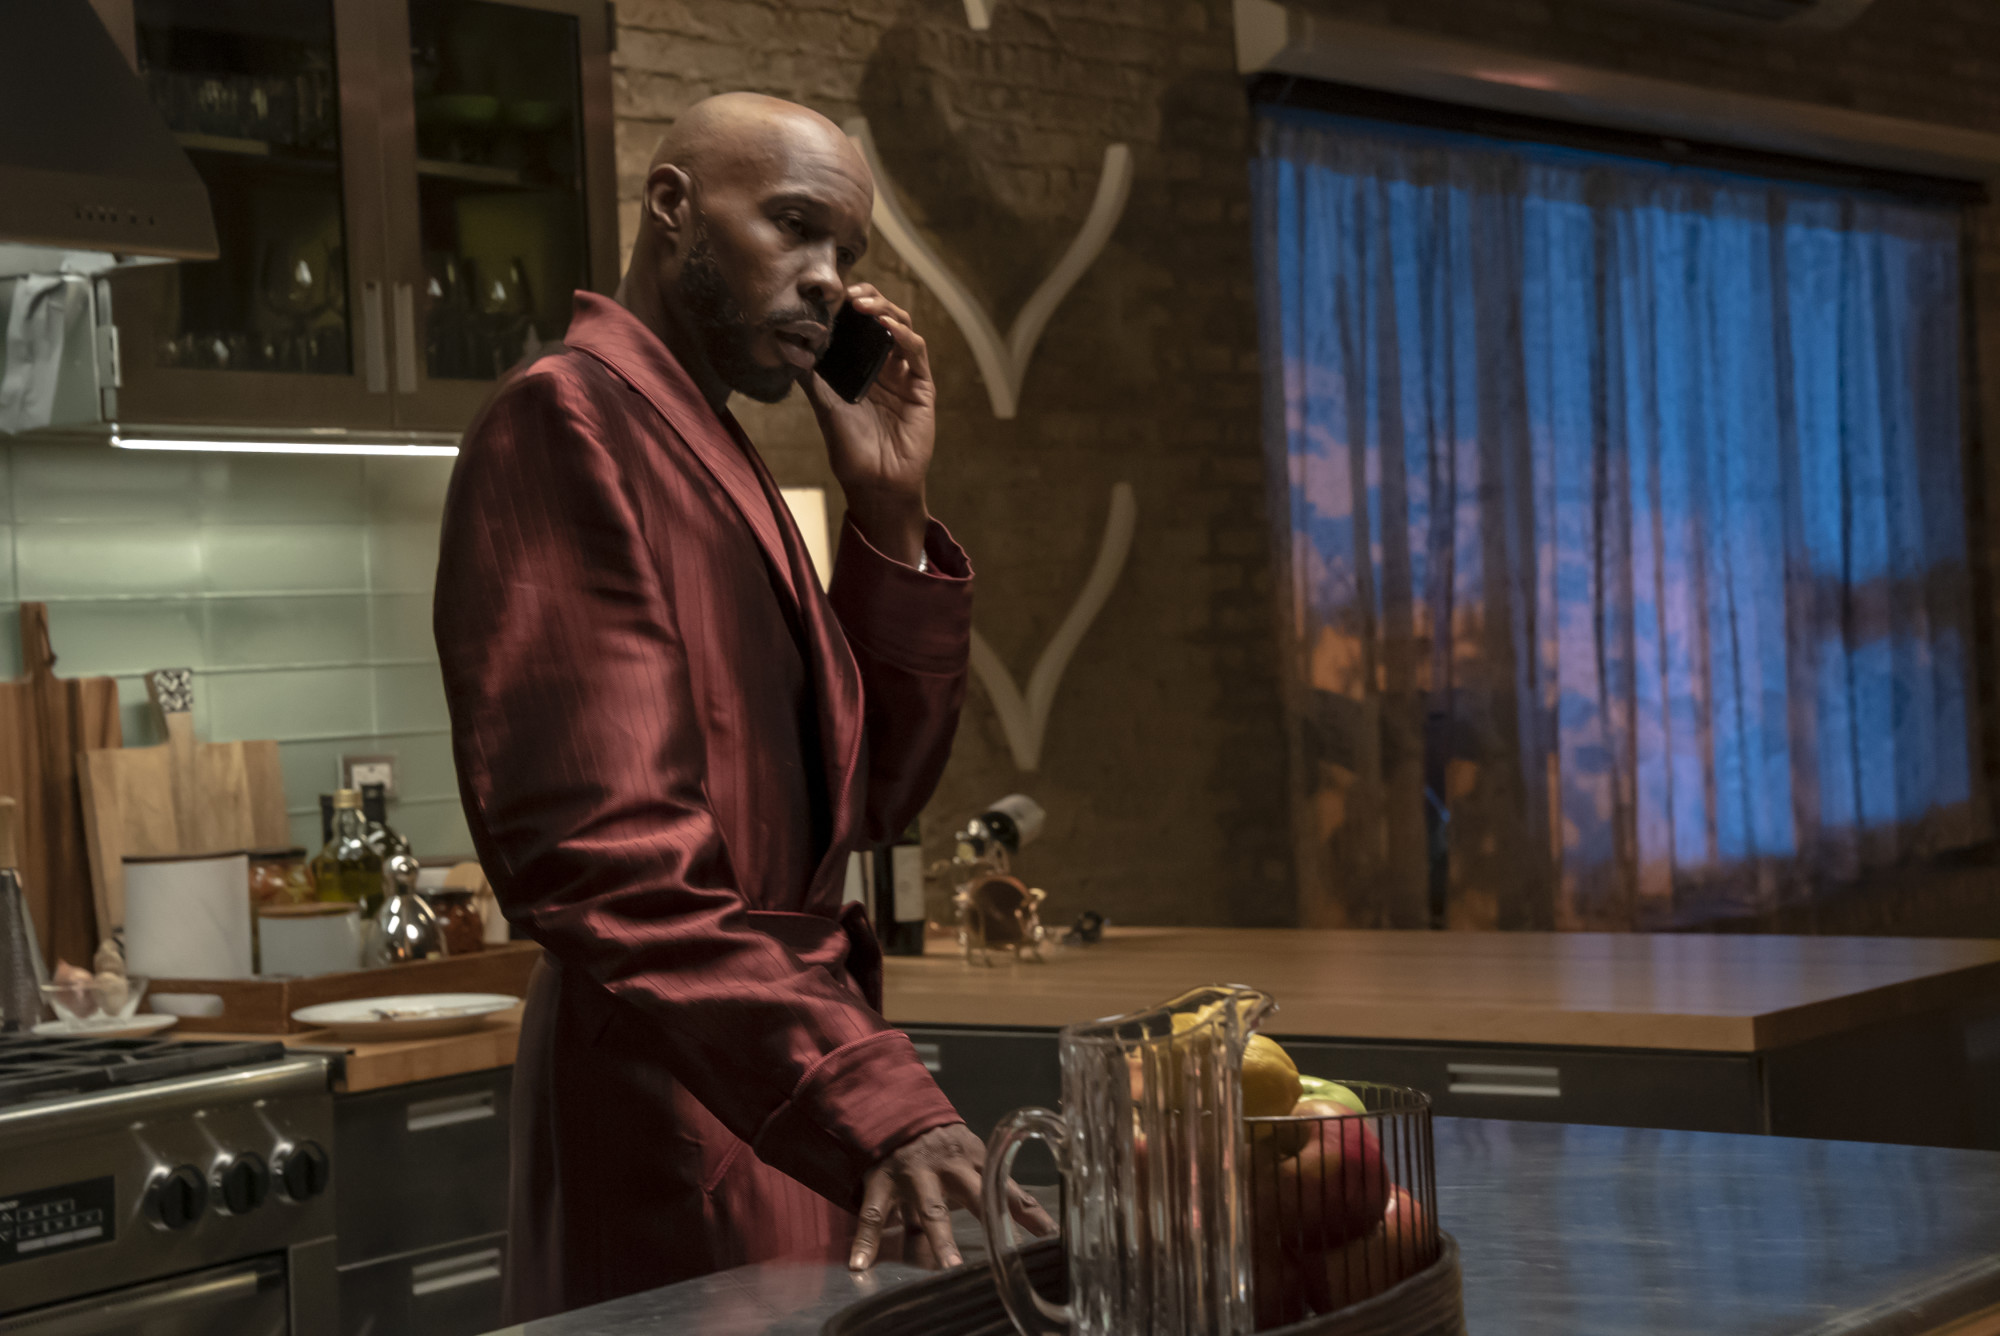 EMPIRE: L-R: Wood Harris in the "What Is Love" season premiere episode of EMPIRE airing Tuesday, Sept. 24 (9:00-10:00 PM ET/PT) on FOX. ©2019 Fox Broadcasting Co. All Rights Reserved. CR: Chuck Hodes/FOX.